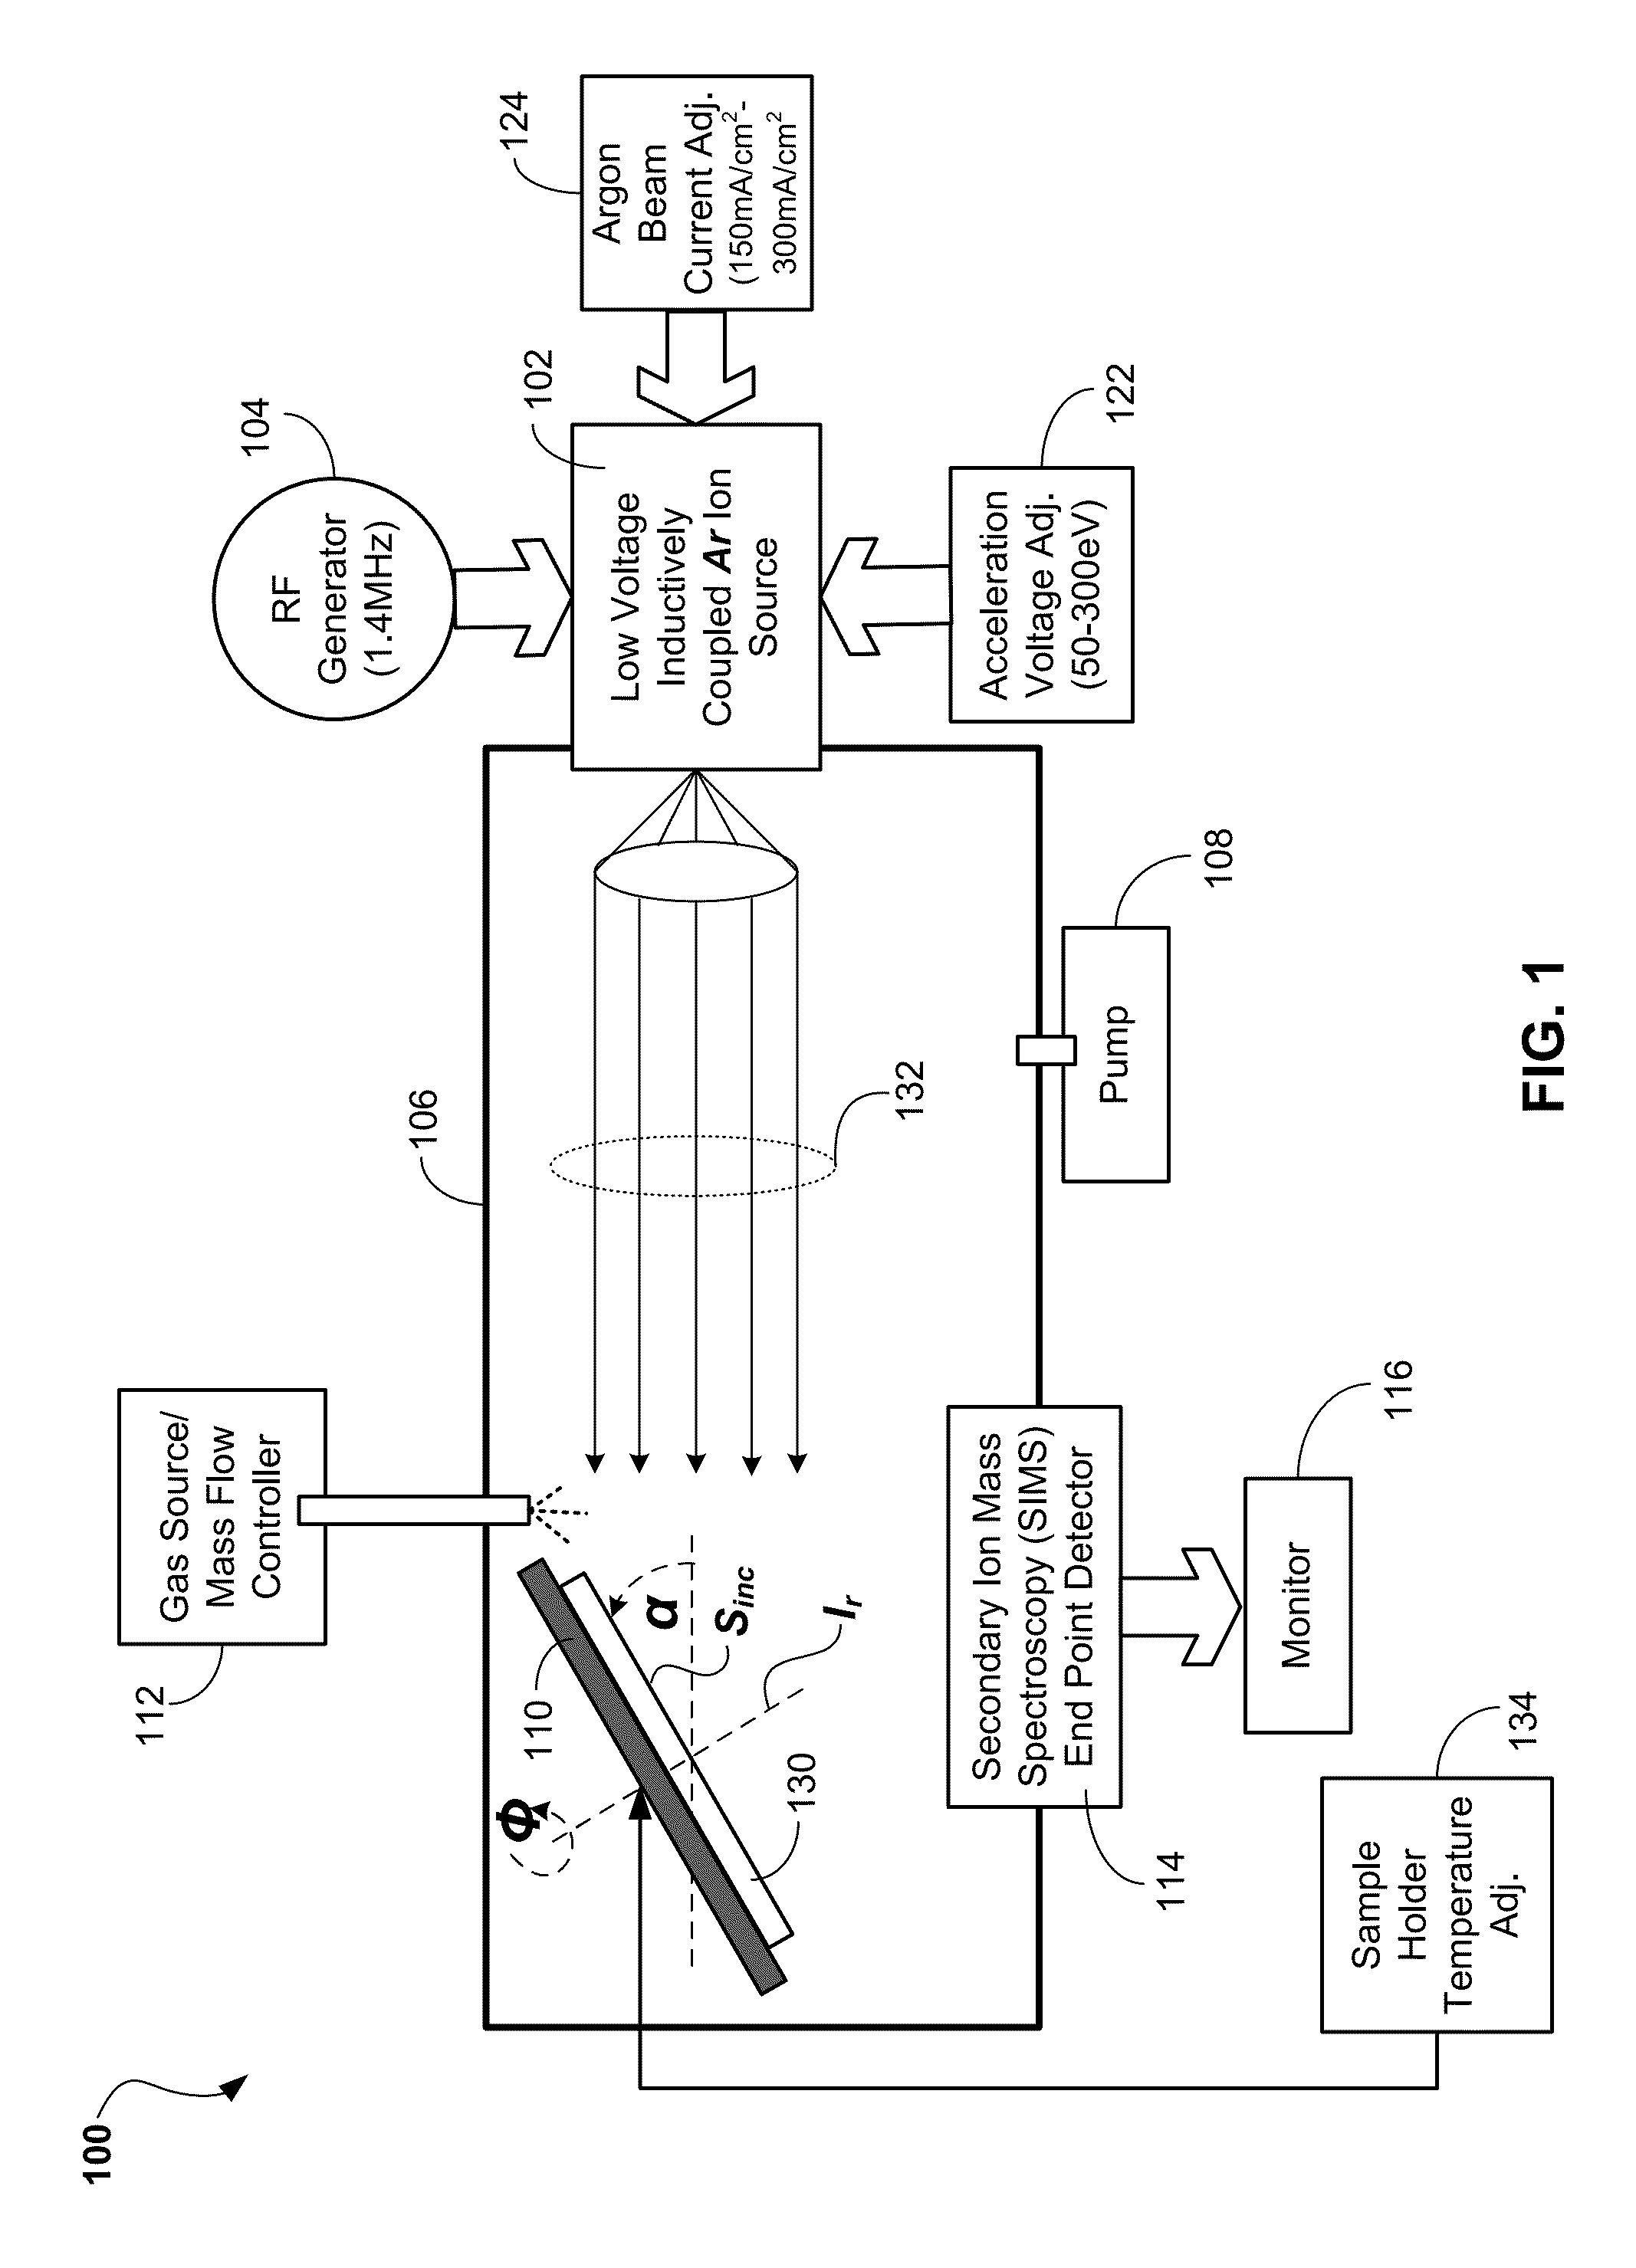 Atom probe tomography sample preparation for three-dimensional (3D) semiconductor devices